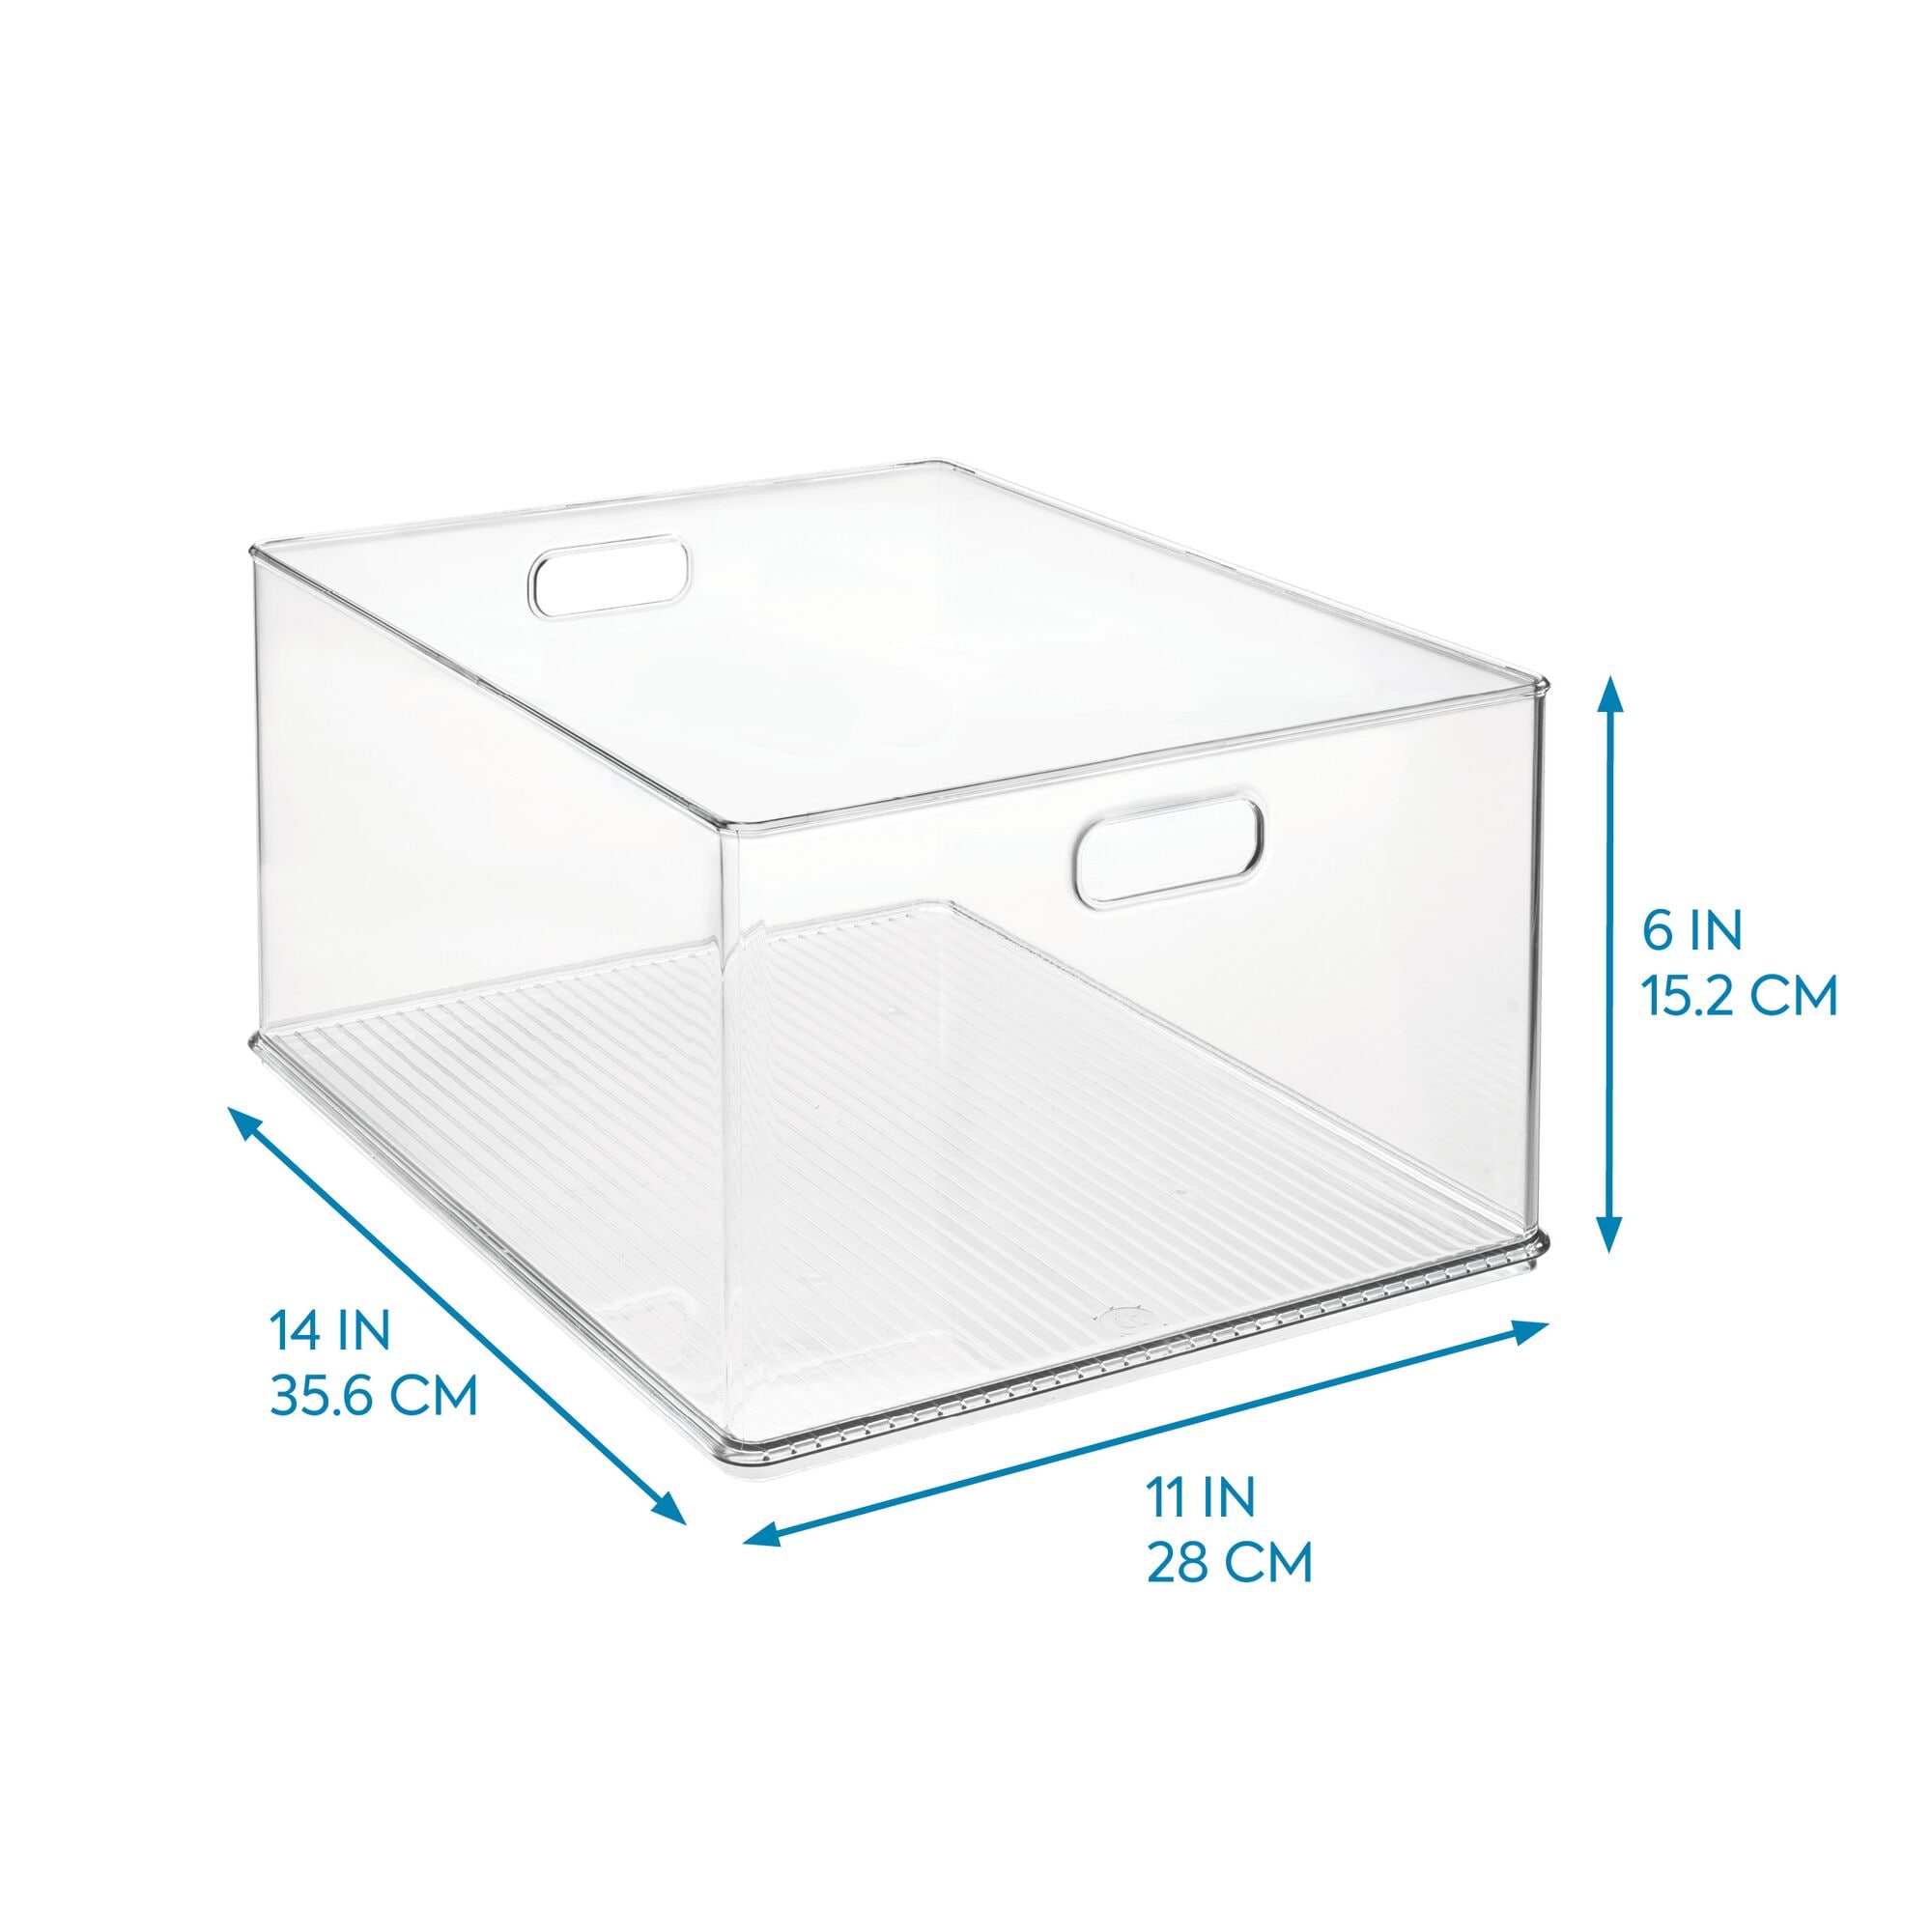 Buy Mobile Bin Storage Unit, Double Row with Large Clear Bins